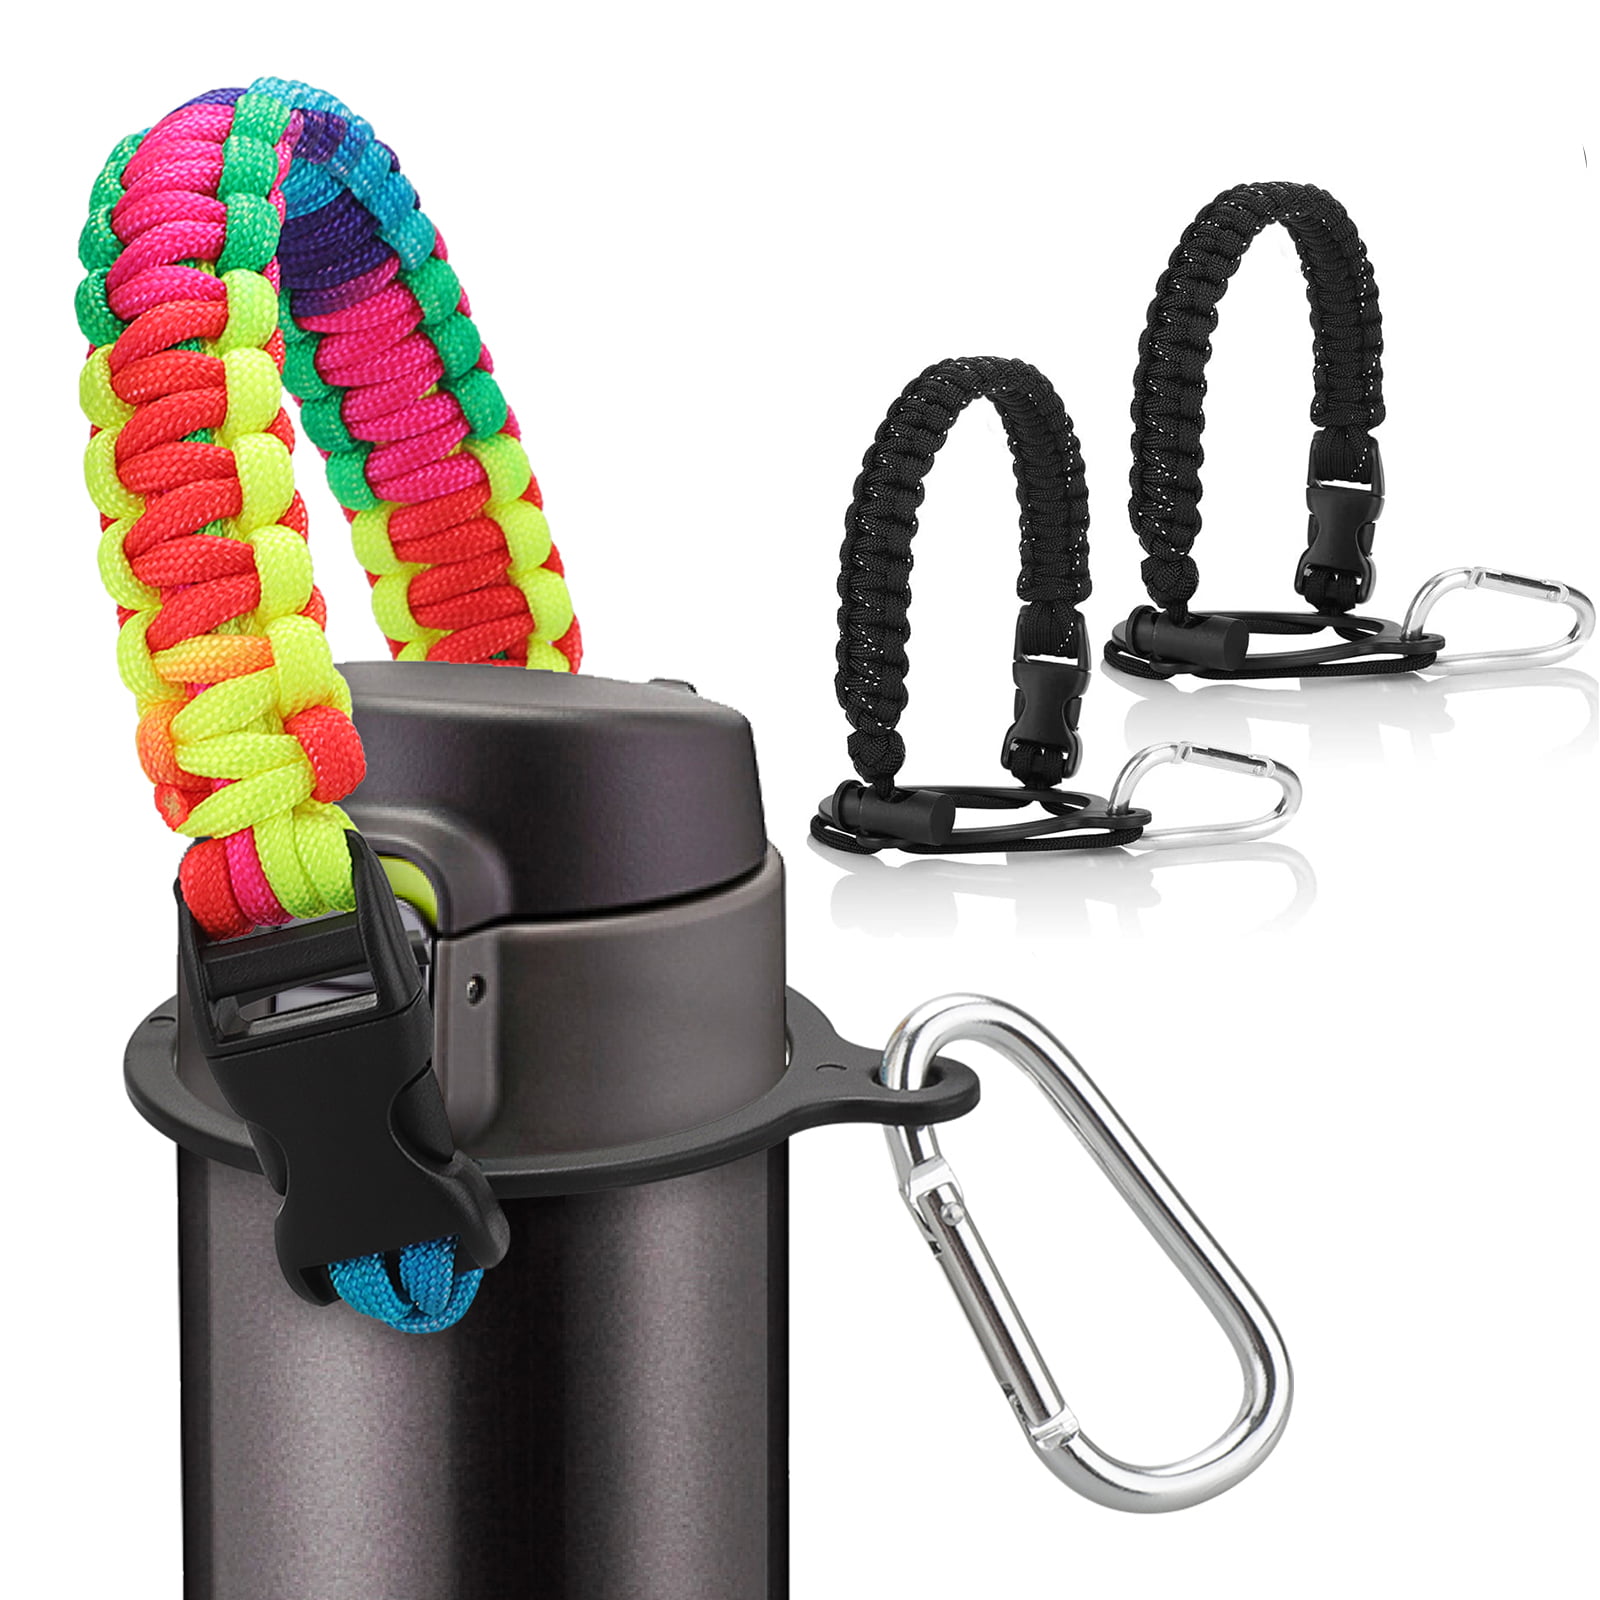 Paracord Organizer Straps Great for wires too 20 Pack 